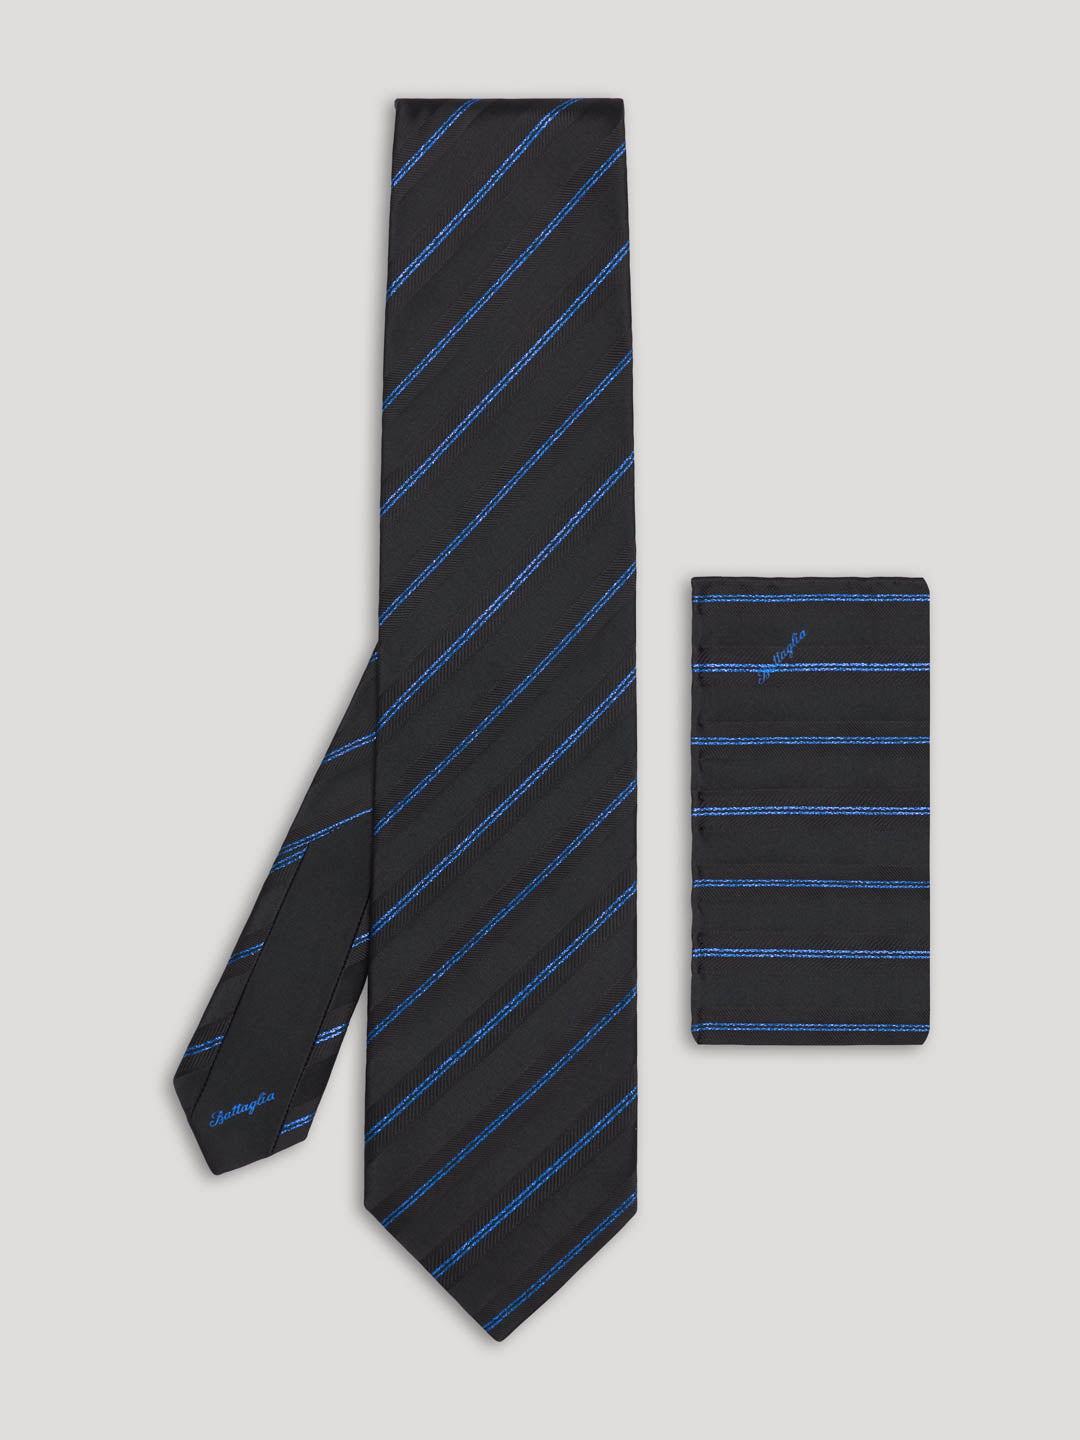 Black silk tie with blue stripes and matching handkerchief. 